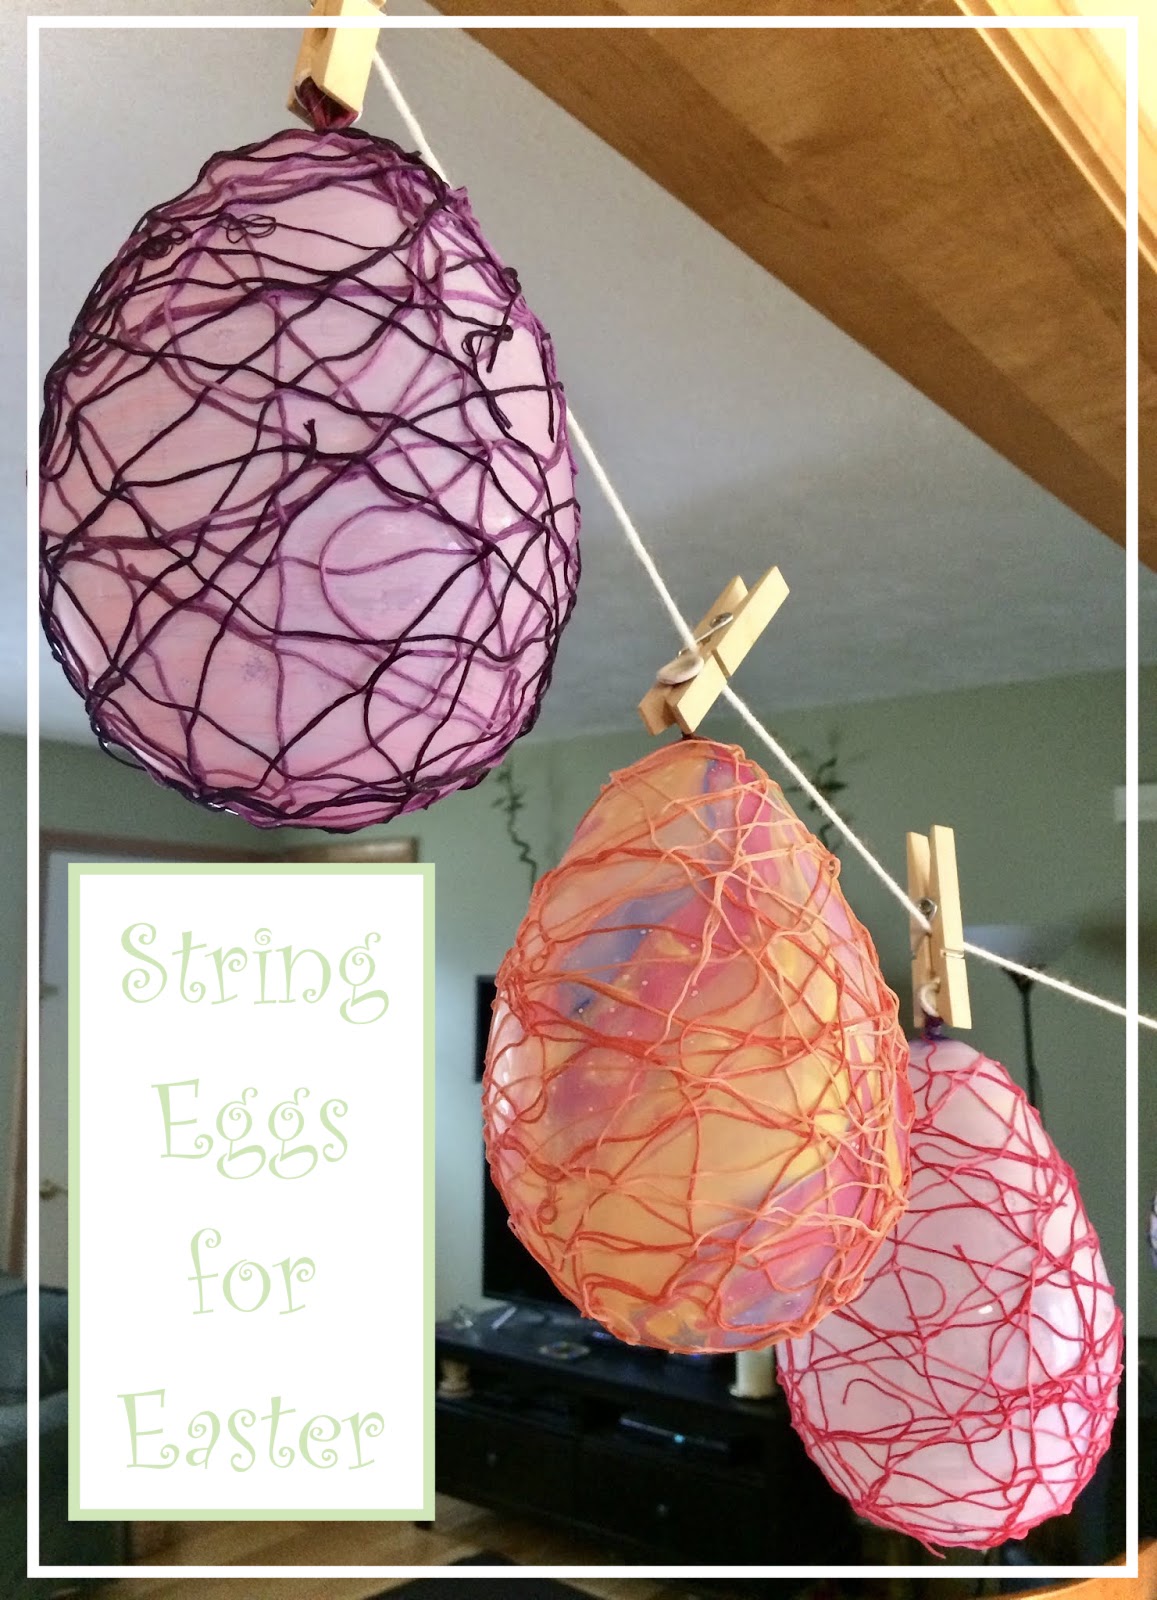 Home-Cooked & Handmade: String Eggs